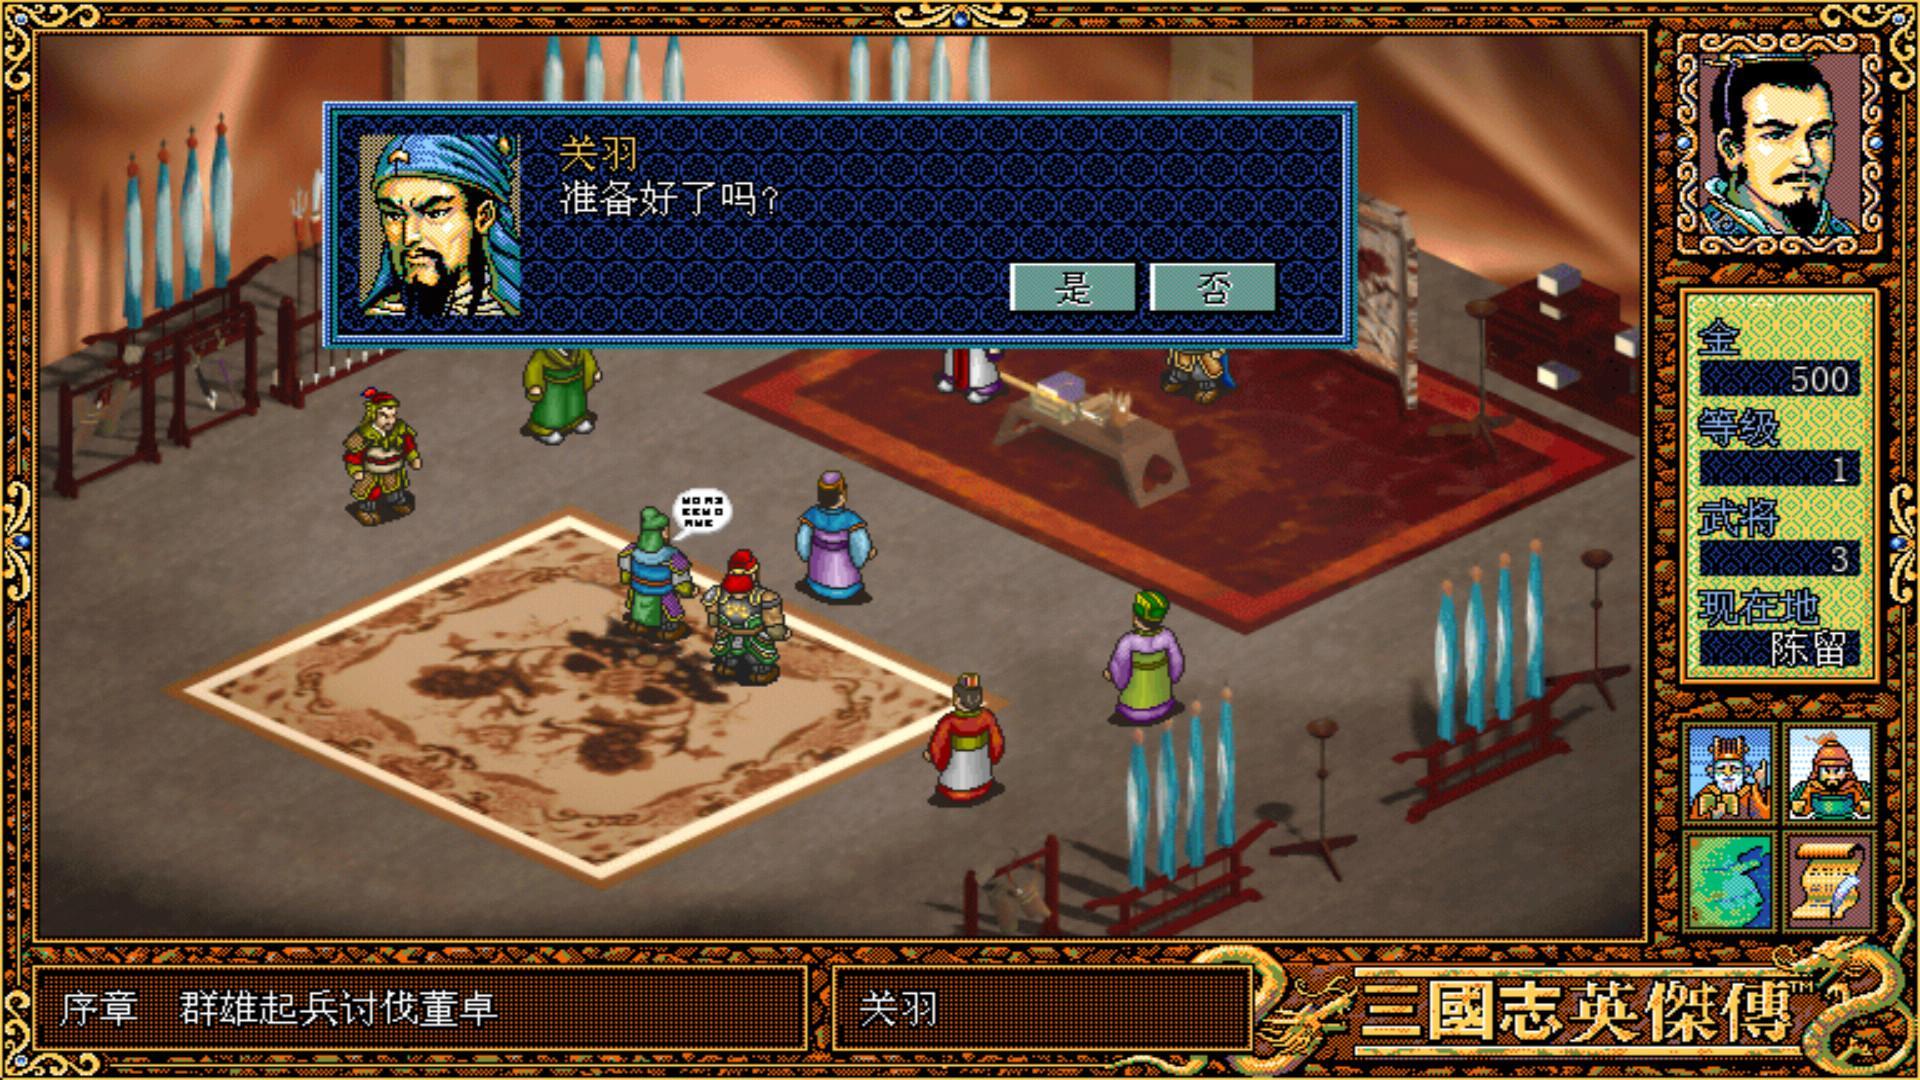 Screenshot 1 of Heroes of the Three Kingdoms-Classic SLG-Strategie-Kriegsschach 1.9